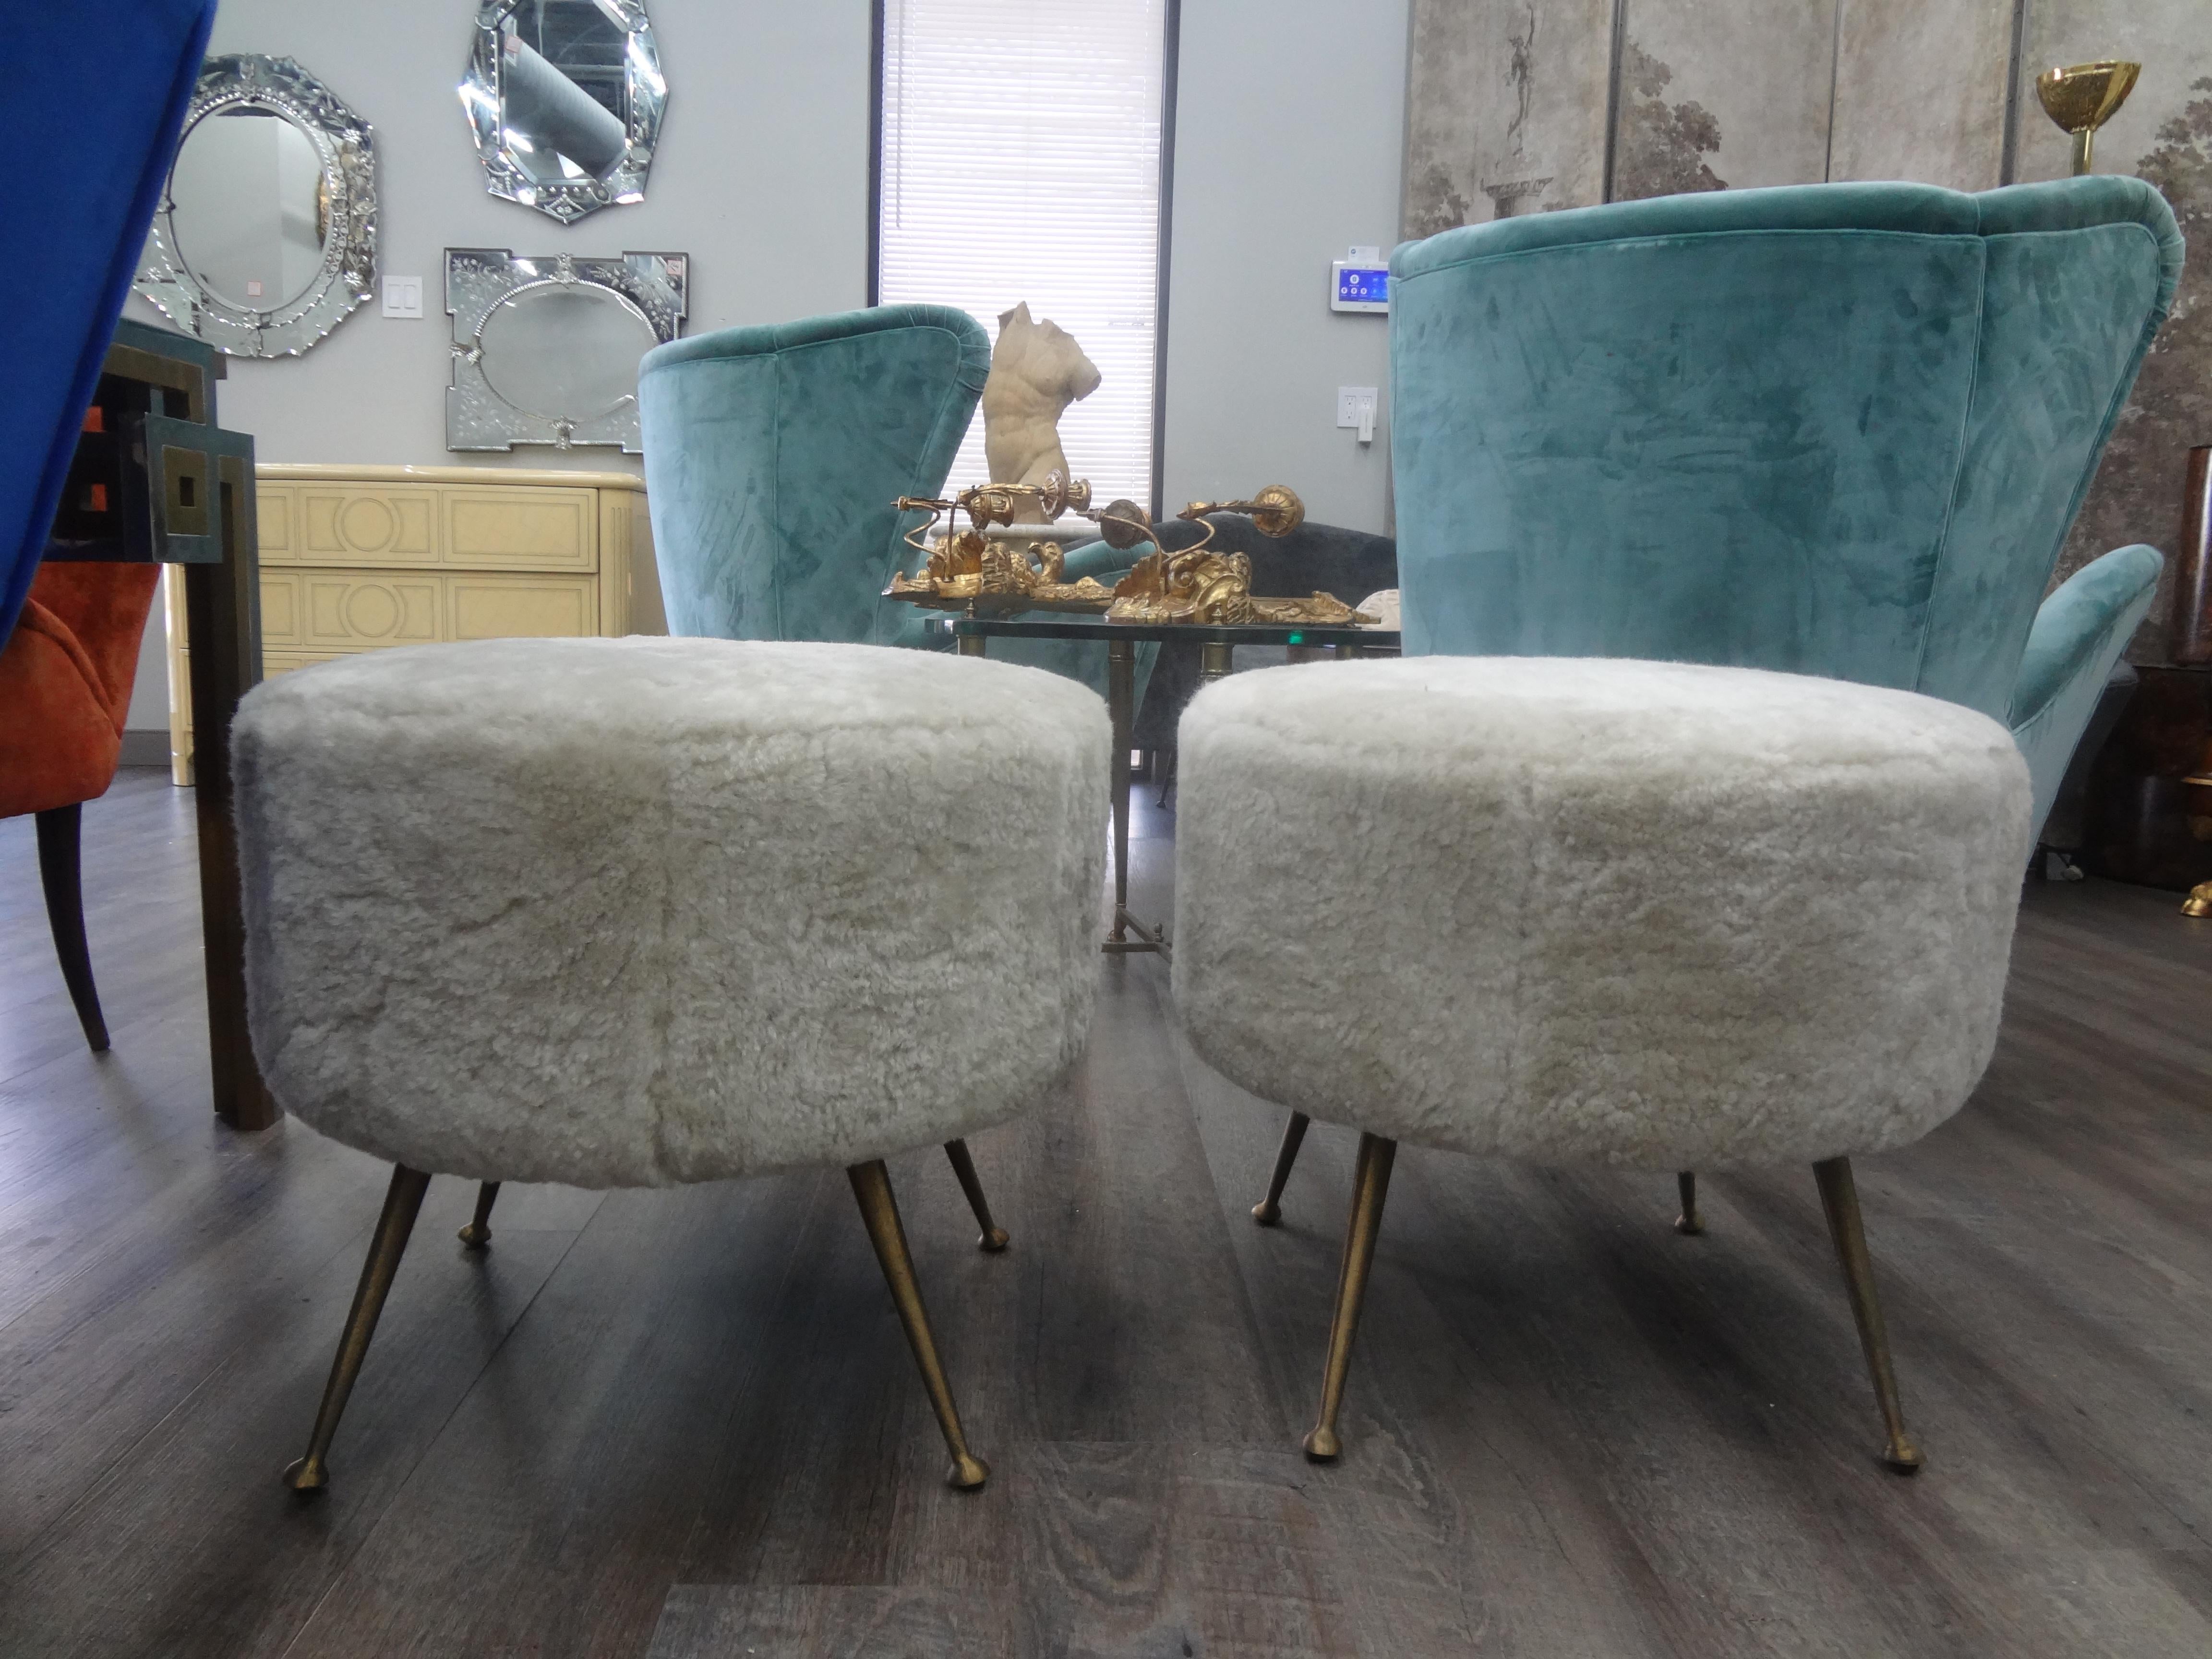 Great sculptural pair of Italian Gio Ponti inspired round poufs, ottomans, stools or benches. This stunning pair of vintage Italian midcentury ottomans with splayed brass legs are newly upholstered in plush cream colored sheepskin. Perfect where